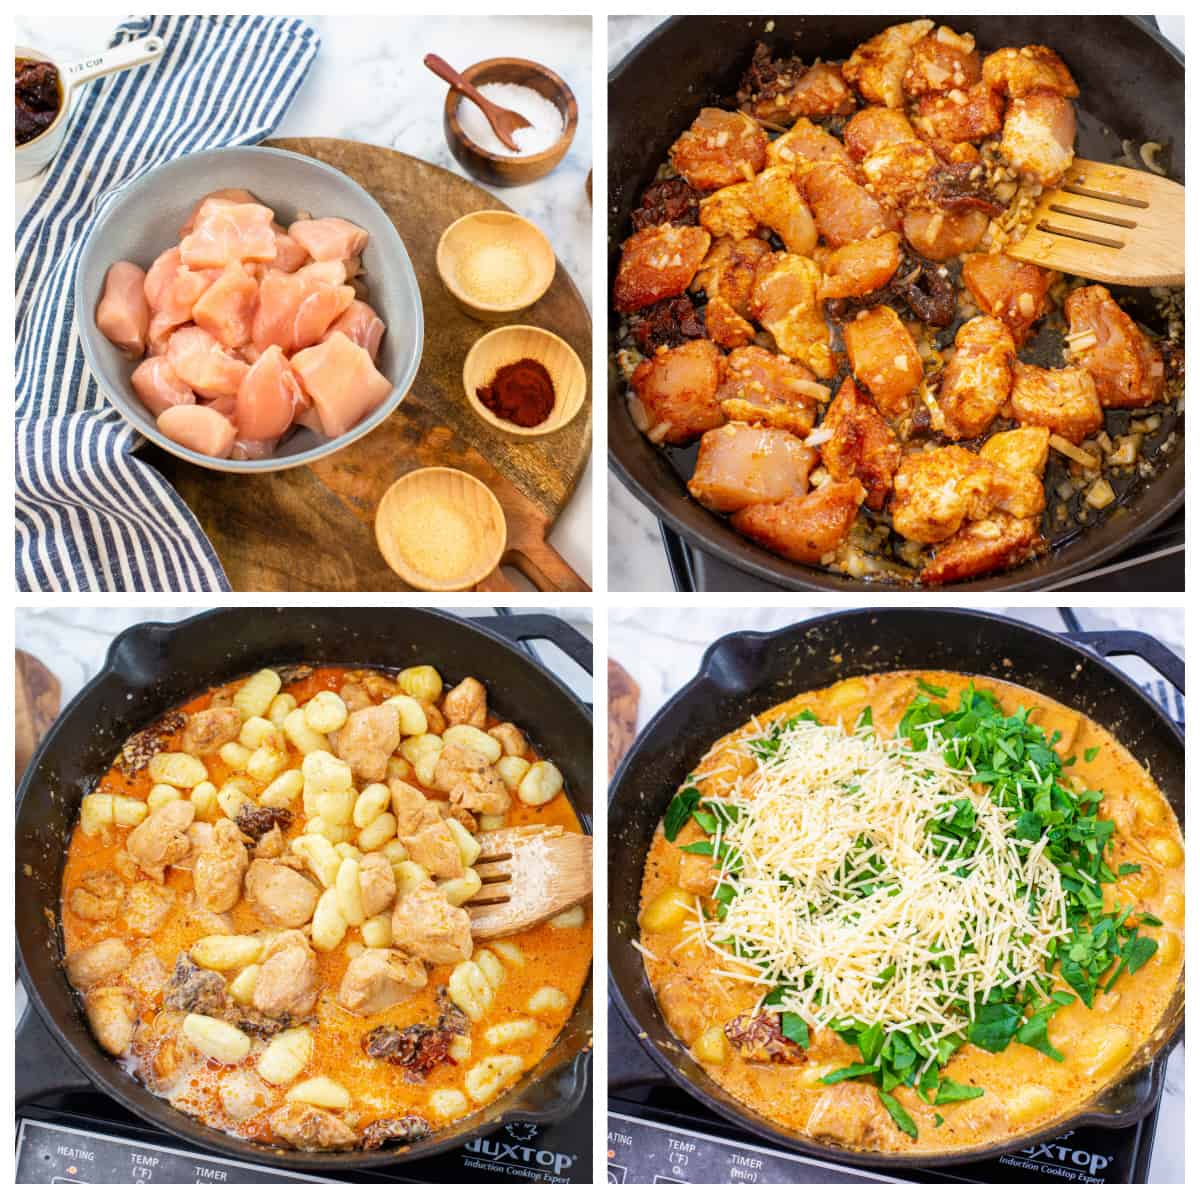 Collage showing how to make Tuscan chicken and gnocchi recipe.